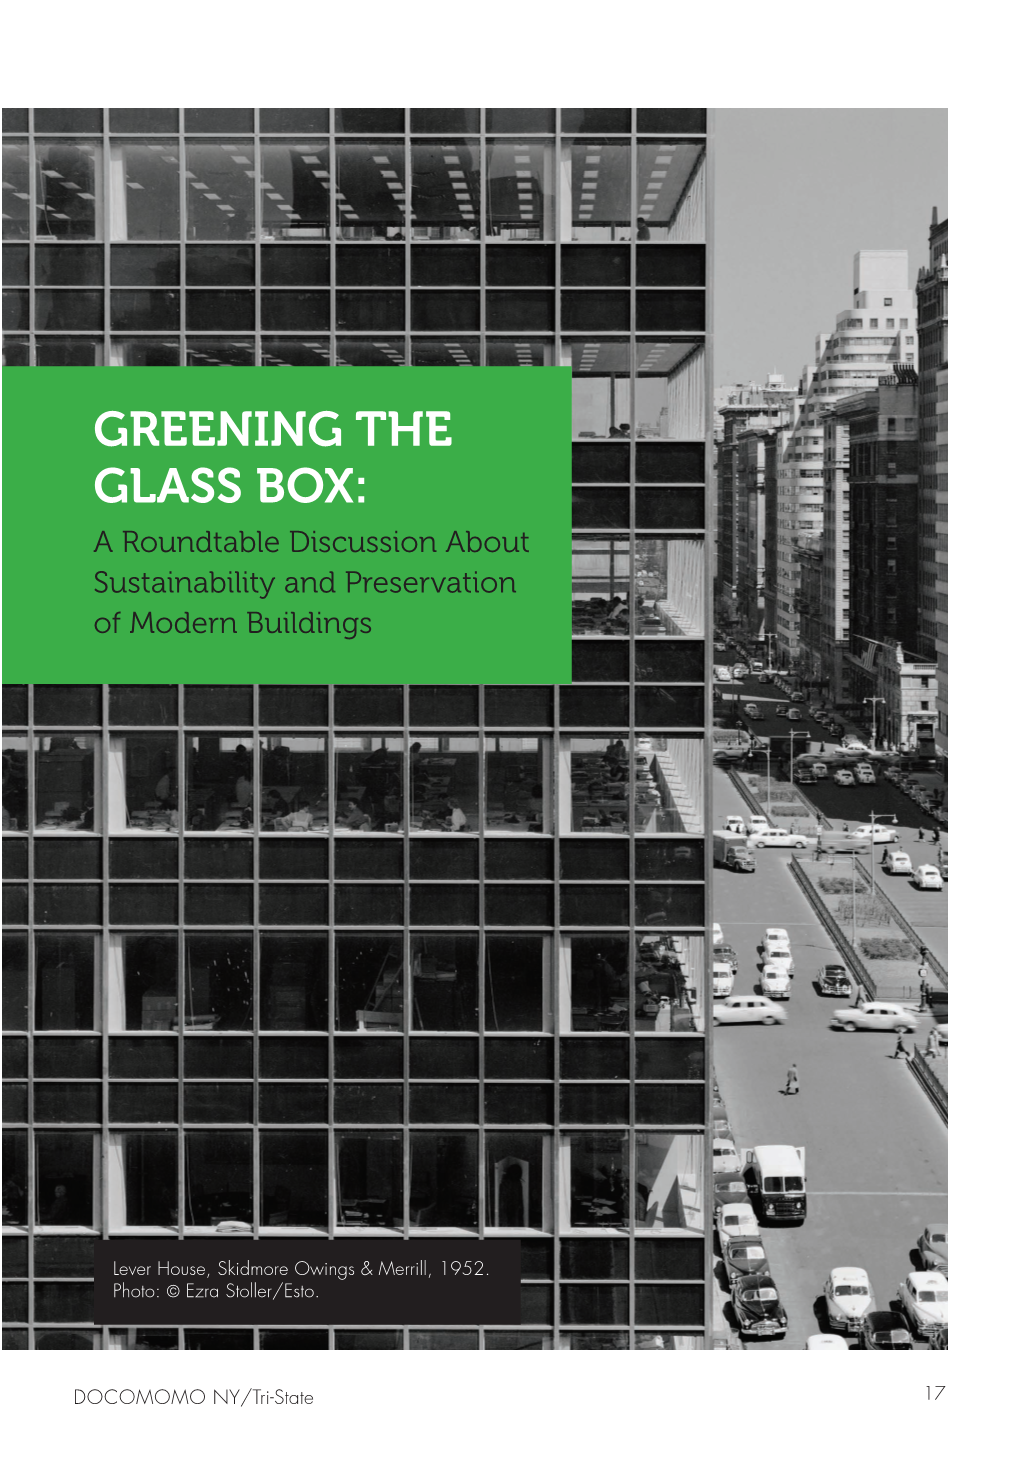 GREENING the GLASS BOX: a Roundtable Discussion About Sustainability and Preservation of Modern Buildings